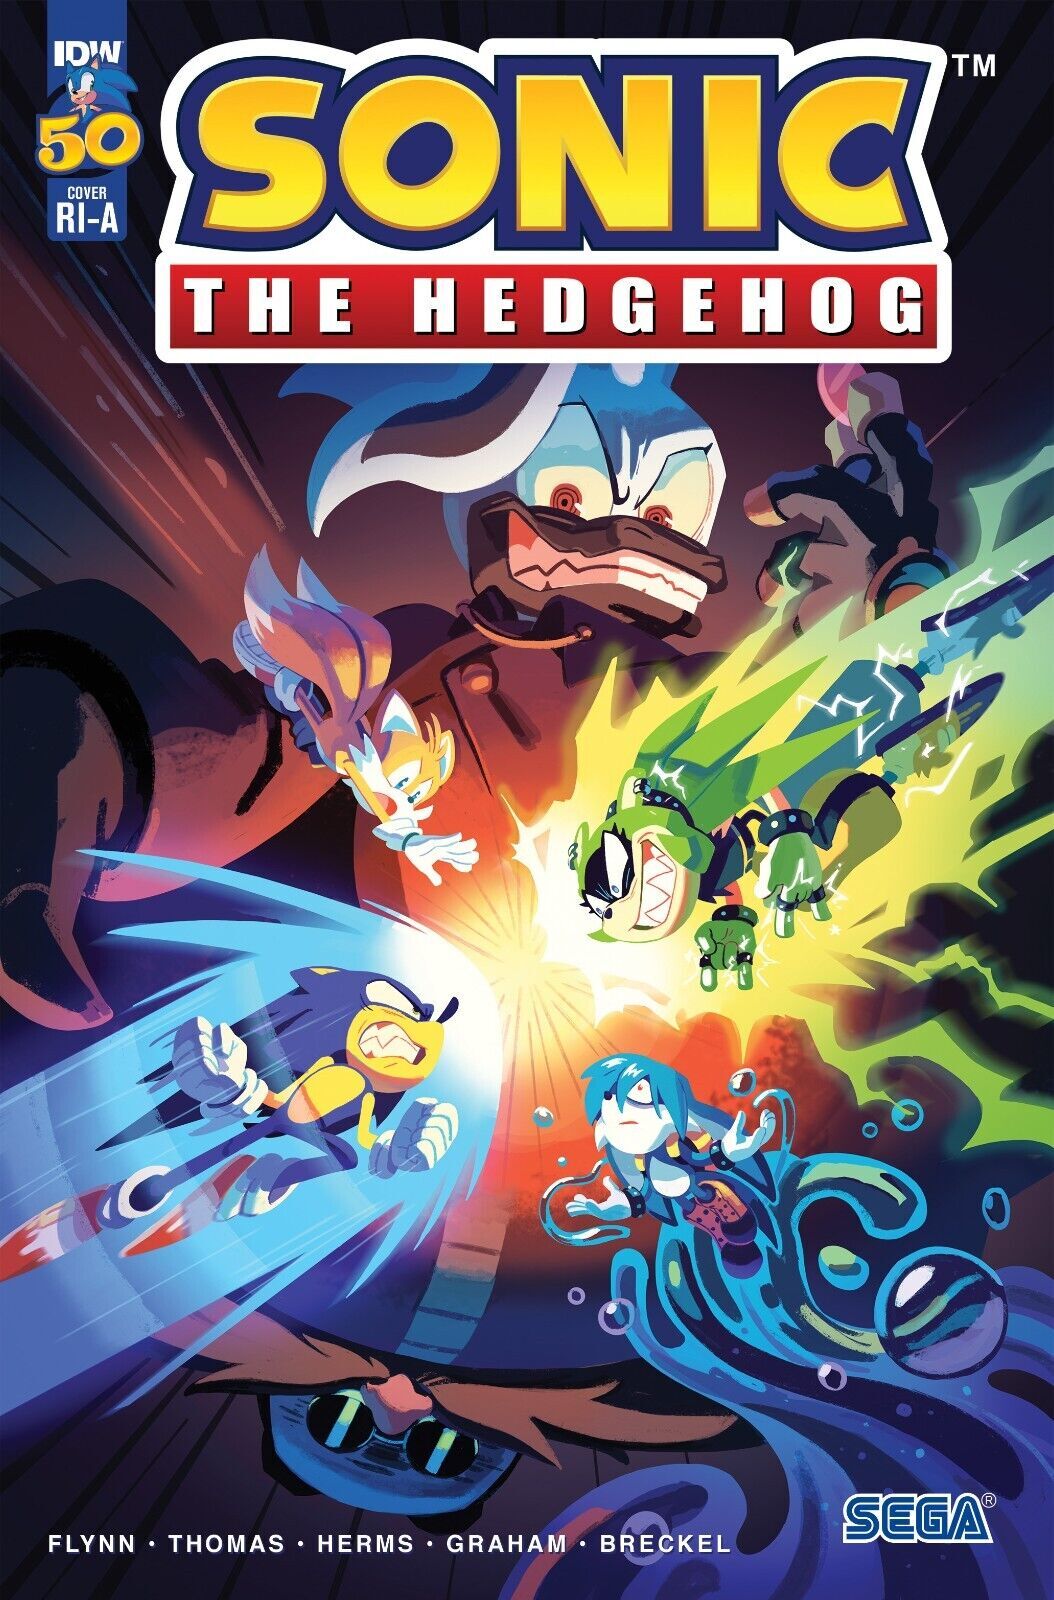 2022 Idw Comics Sonic The Hedgehog 50 110 Variant Cover Comic Books Modern Age Idw 